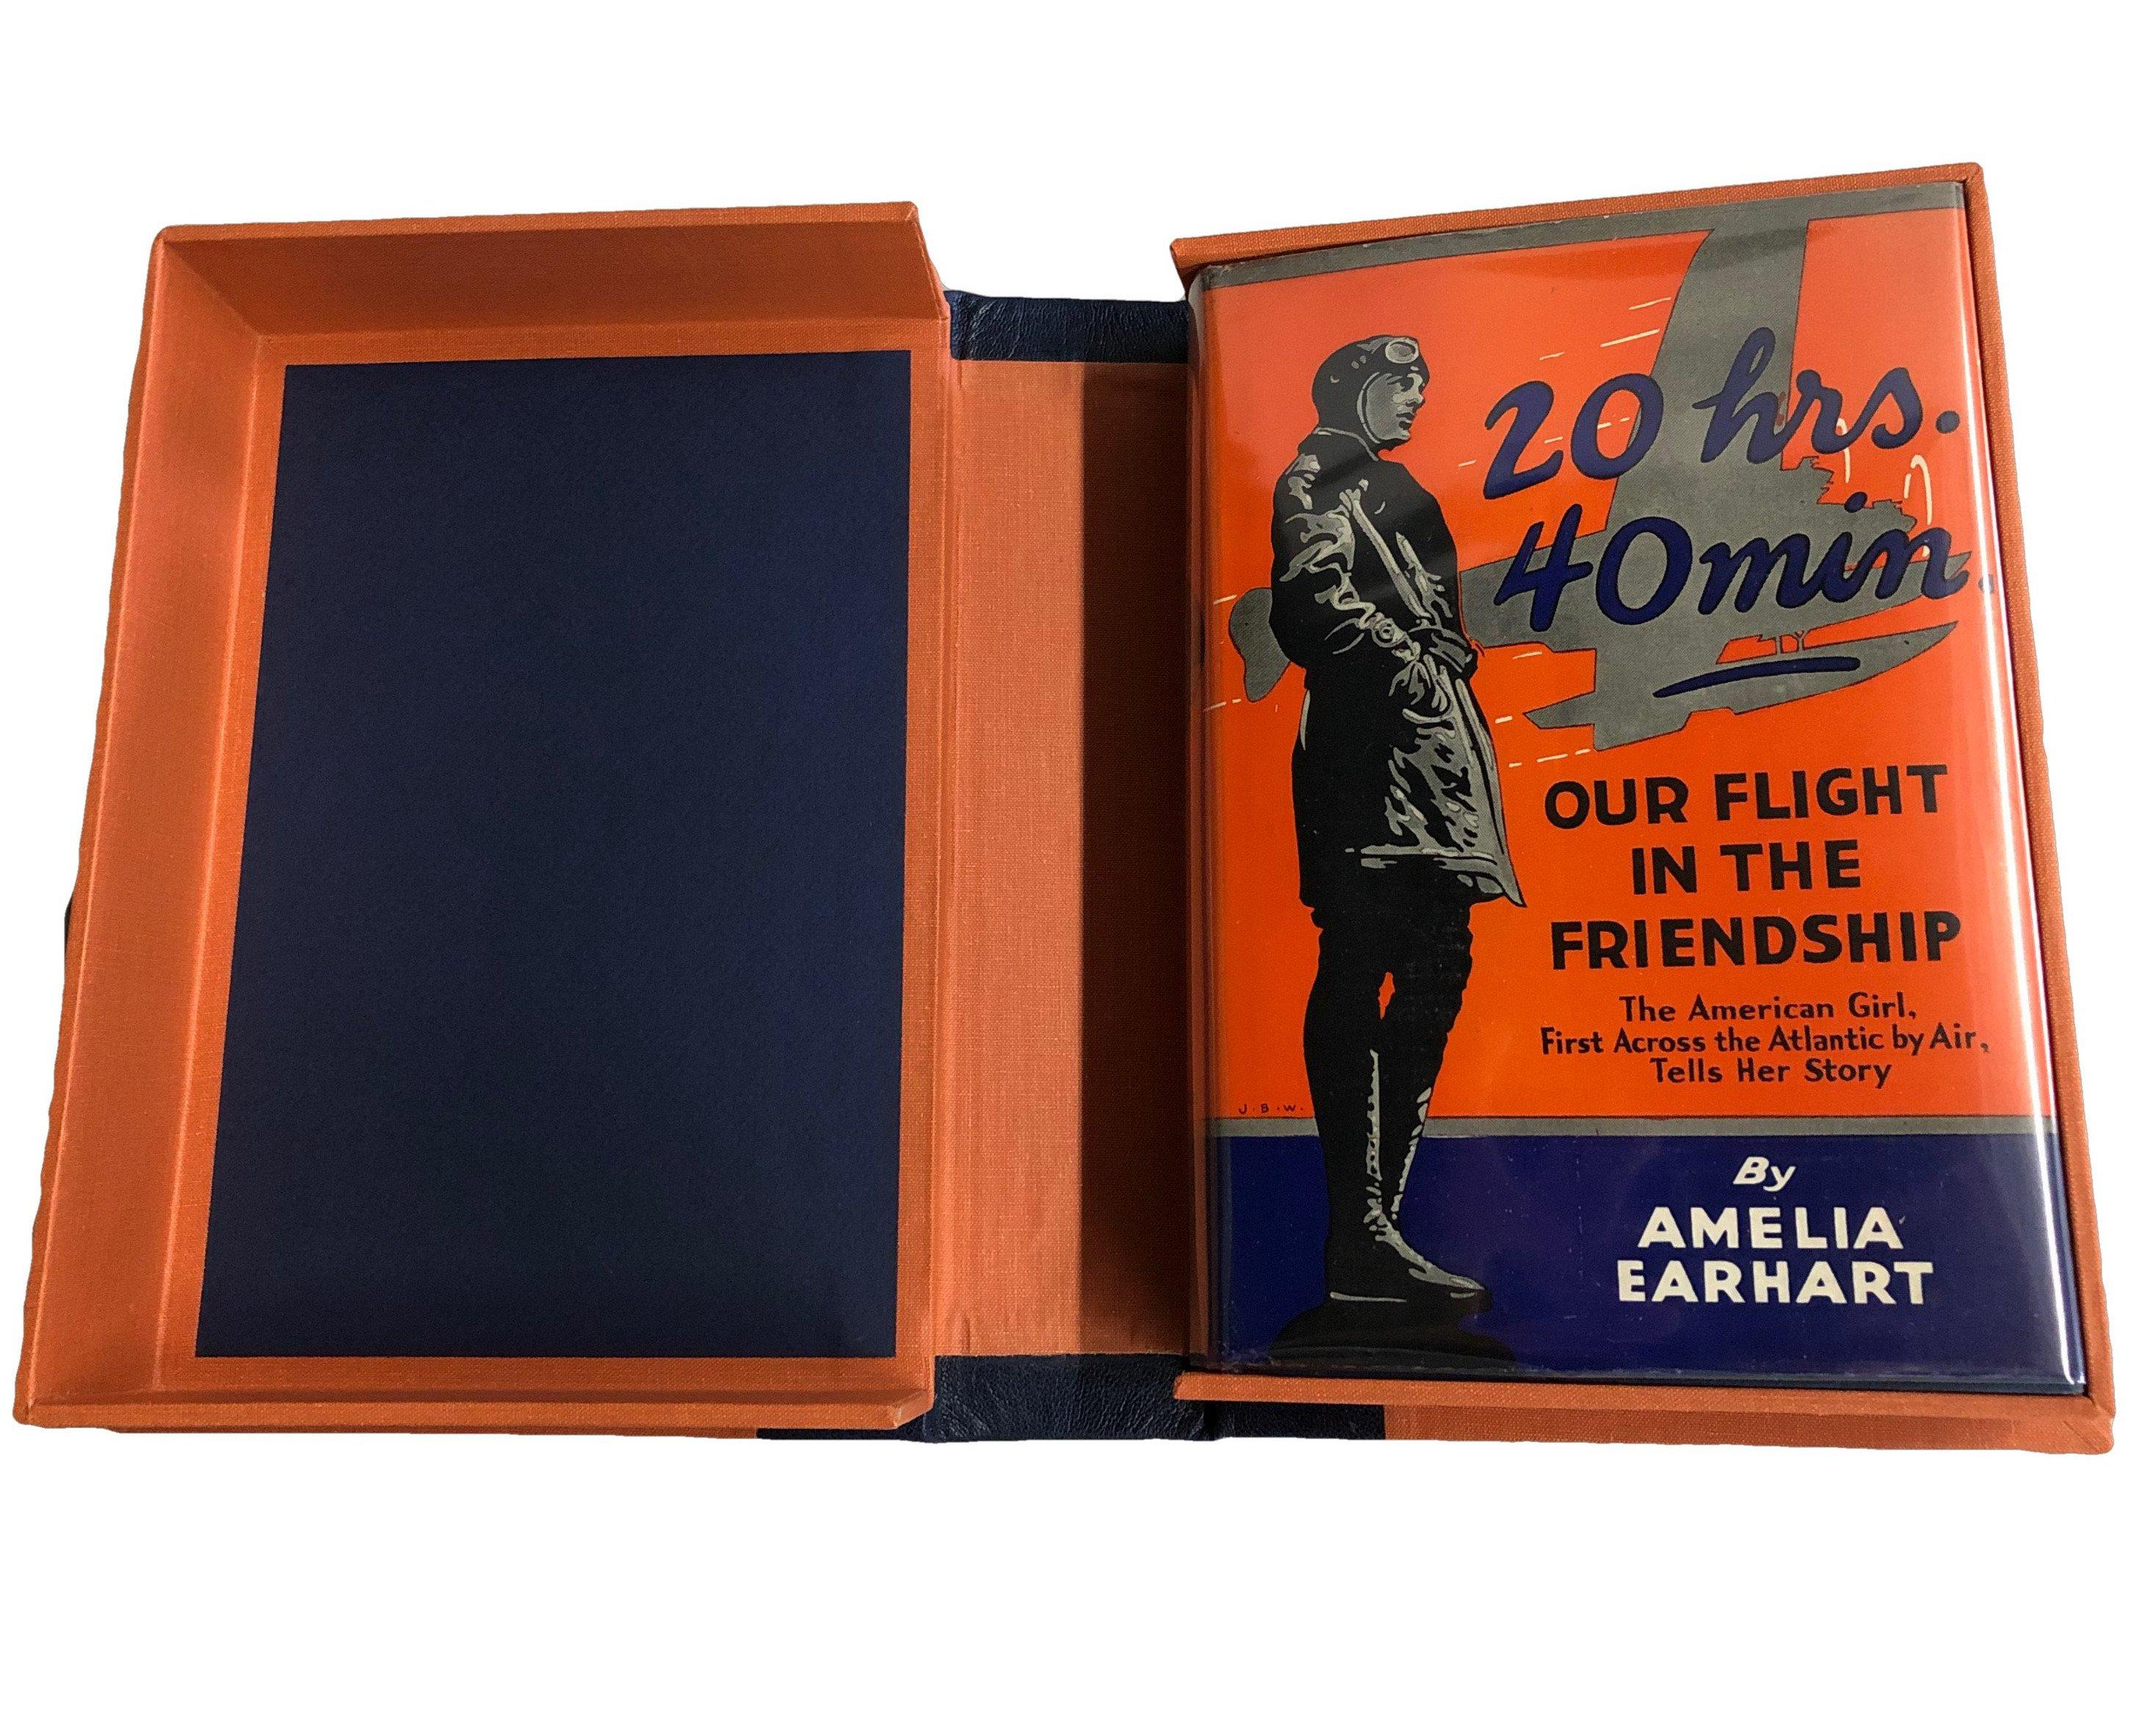 Arhart, Amelia. 20 Hrs. 40 Min. Our Flight in the Friendship. New York: Grosset and Dunlap, 1928. First Grosset edition, signed by Amelia Earhart. In the original dust jacket and presented with a custom matching clamshell.

Presented is the first